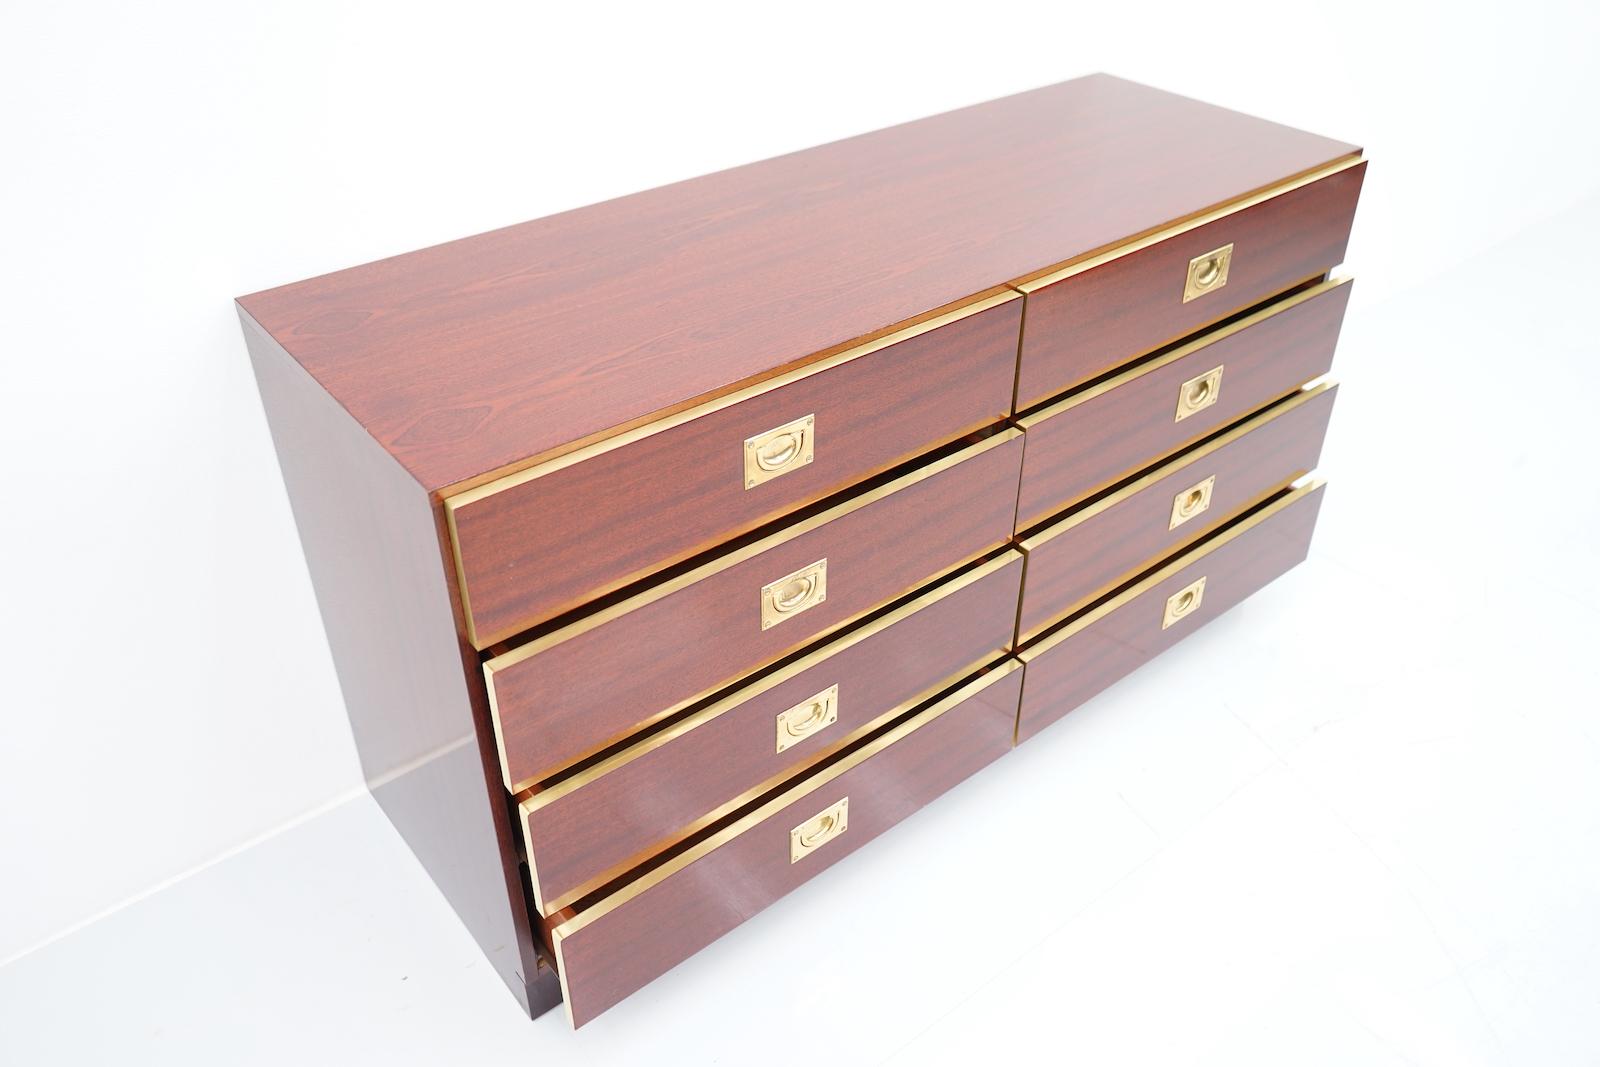 Chest of drawers or sideboard made of mahogany and brass with 8 drawers. 

Dimensions: Height: 23.81 in. (60,5 cm) Width: 44.29 in. (112,5 cm) Depth: 15.55 in. (39,5 cm)
Good to very good condition.